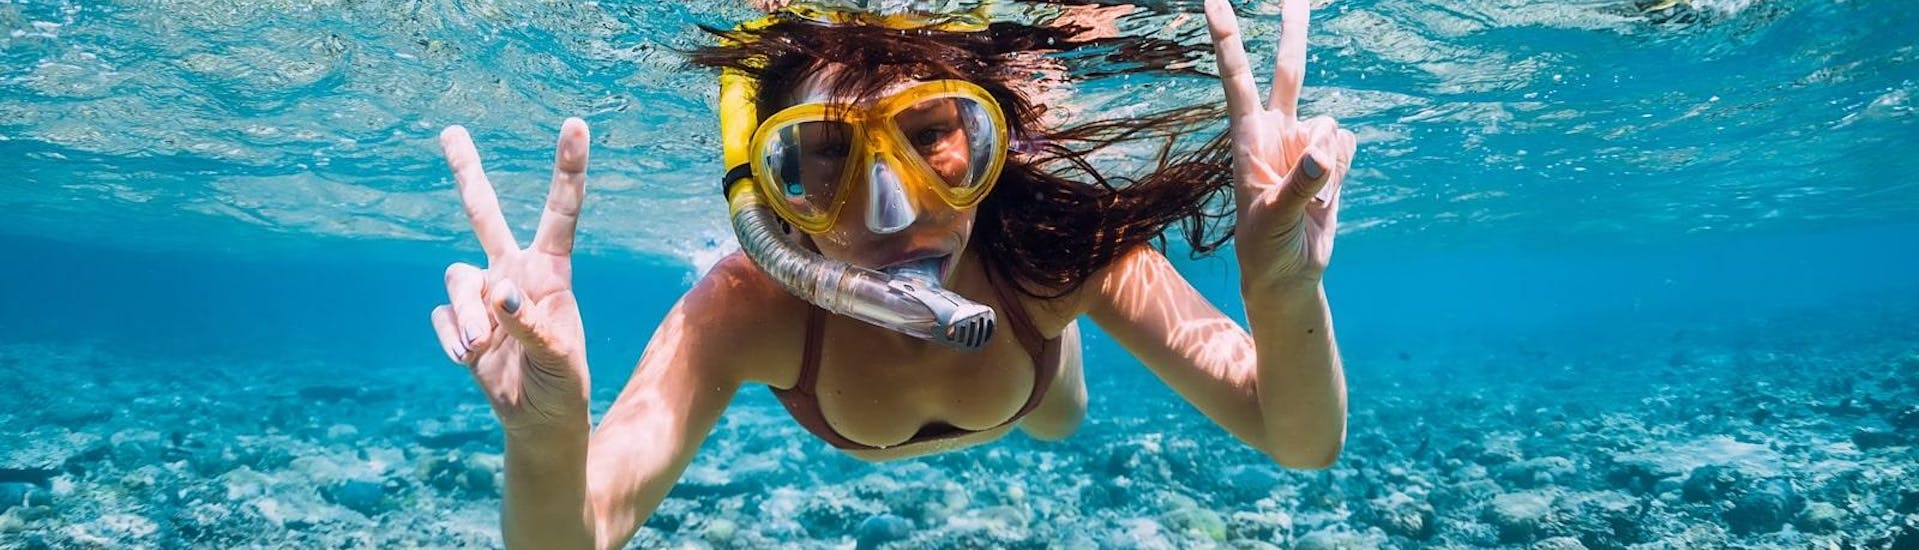 During the Snorkeling on the Gold Coast - Cook Island, a girl is exploring the underwater world under the guidance of an experienced instructor from Gold Coast Dive Centre.